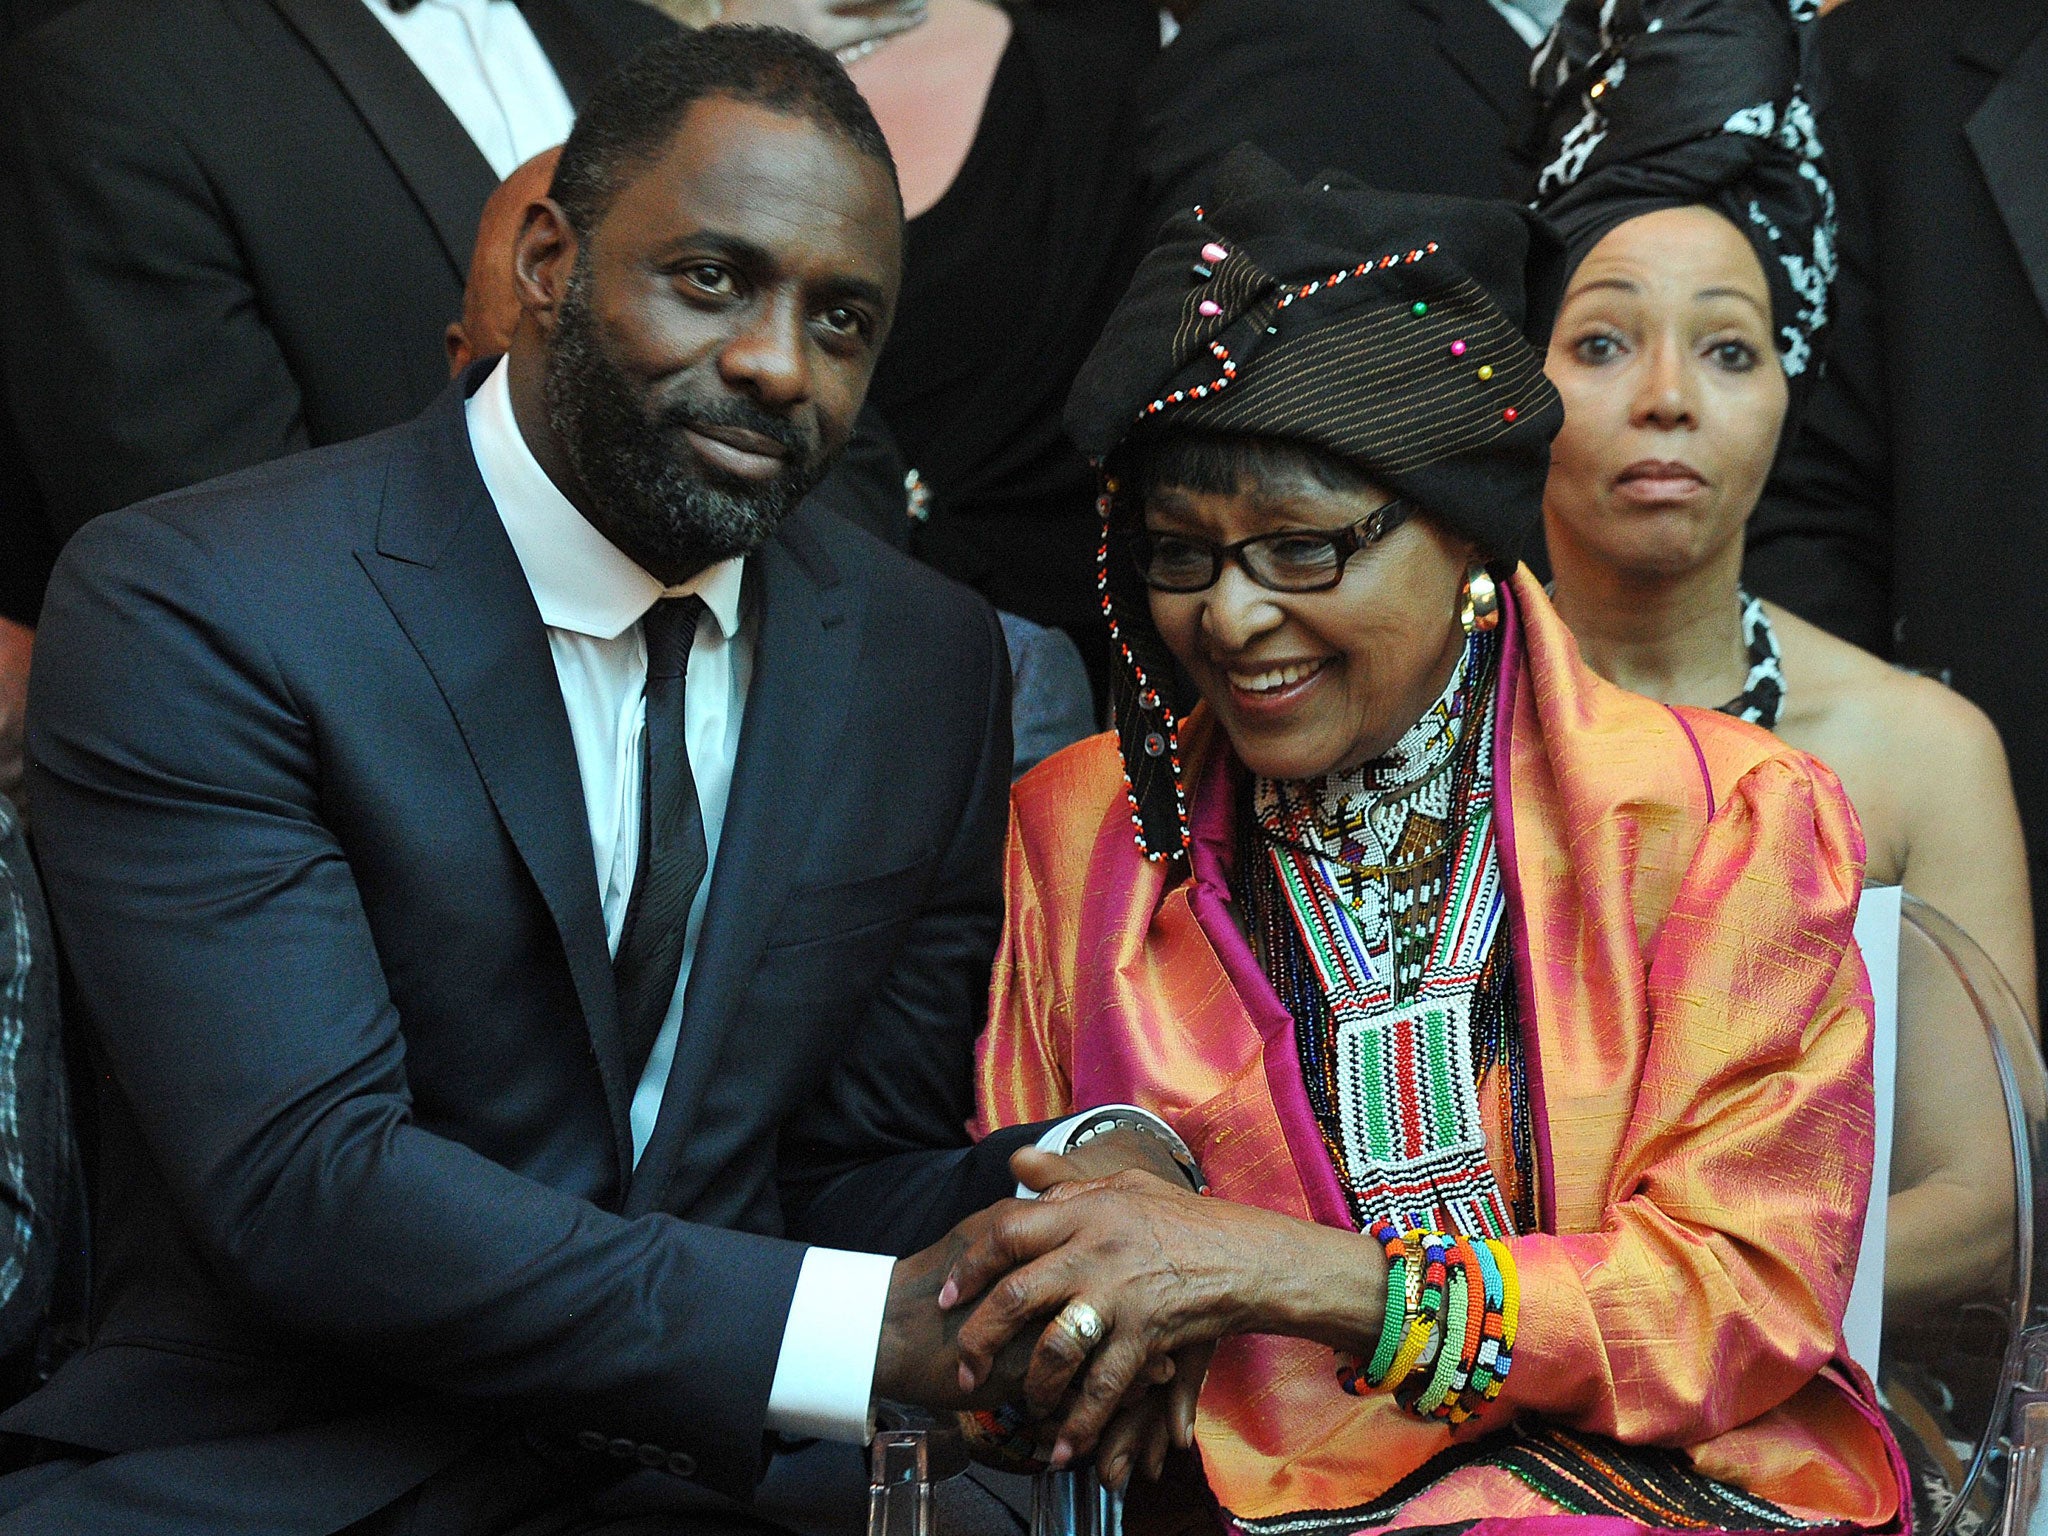 Nelson Mandela’s second wife, Winnie Madikizela-Mandela, right, and British actor Idris Elba, left, who plays the anti-apartheid icon in 'Mandela: Long Walk To Freedom', attend the film’s premiere in Johannesburg